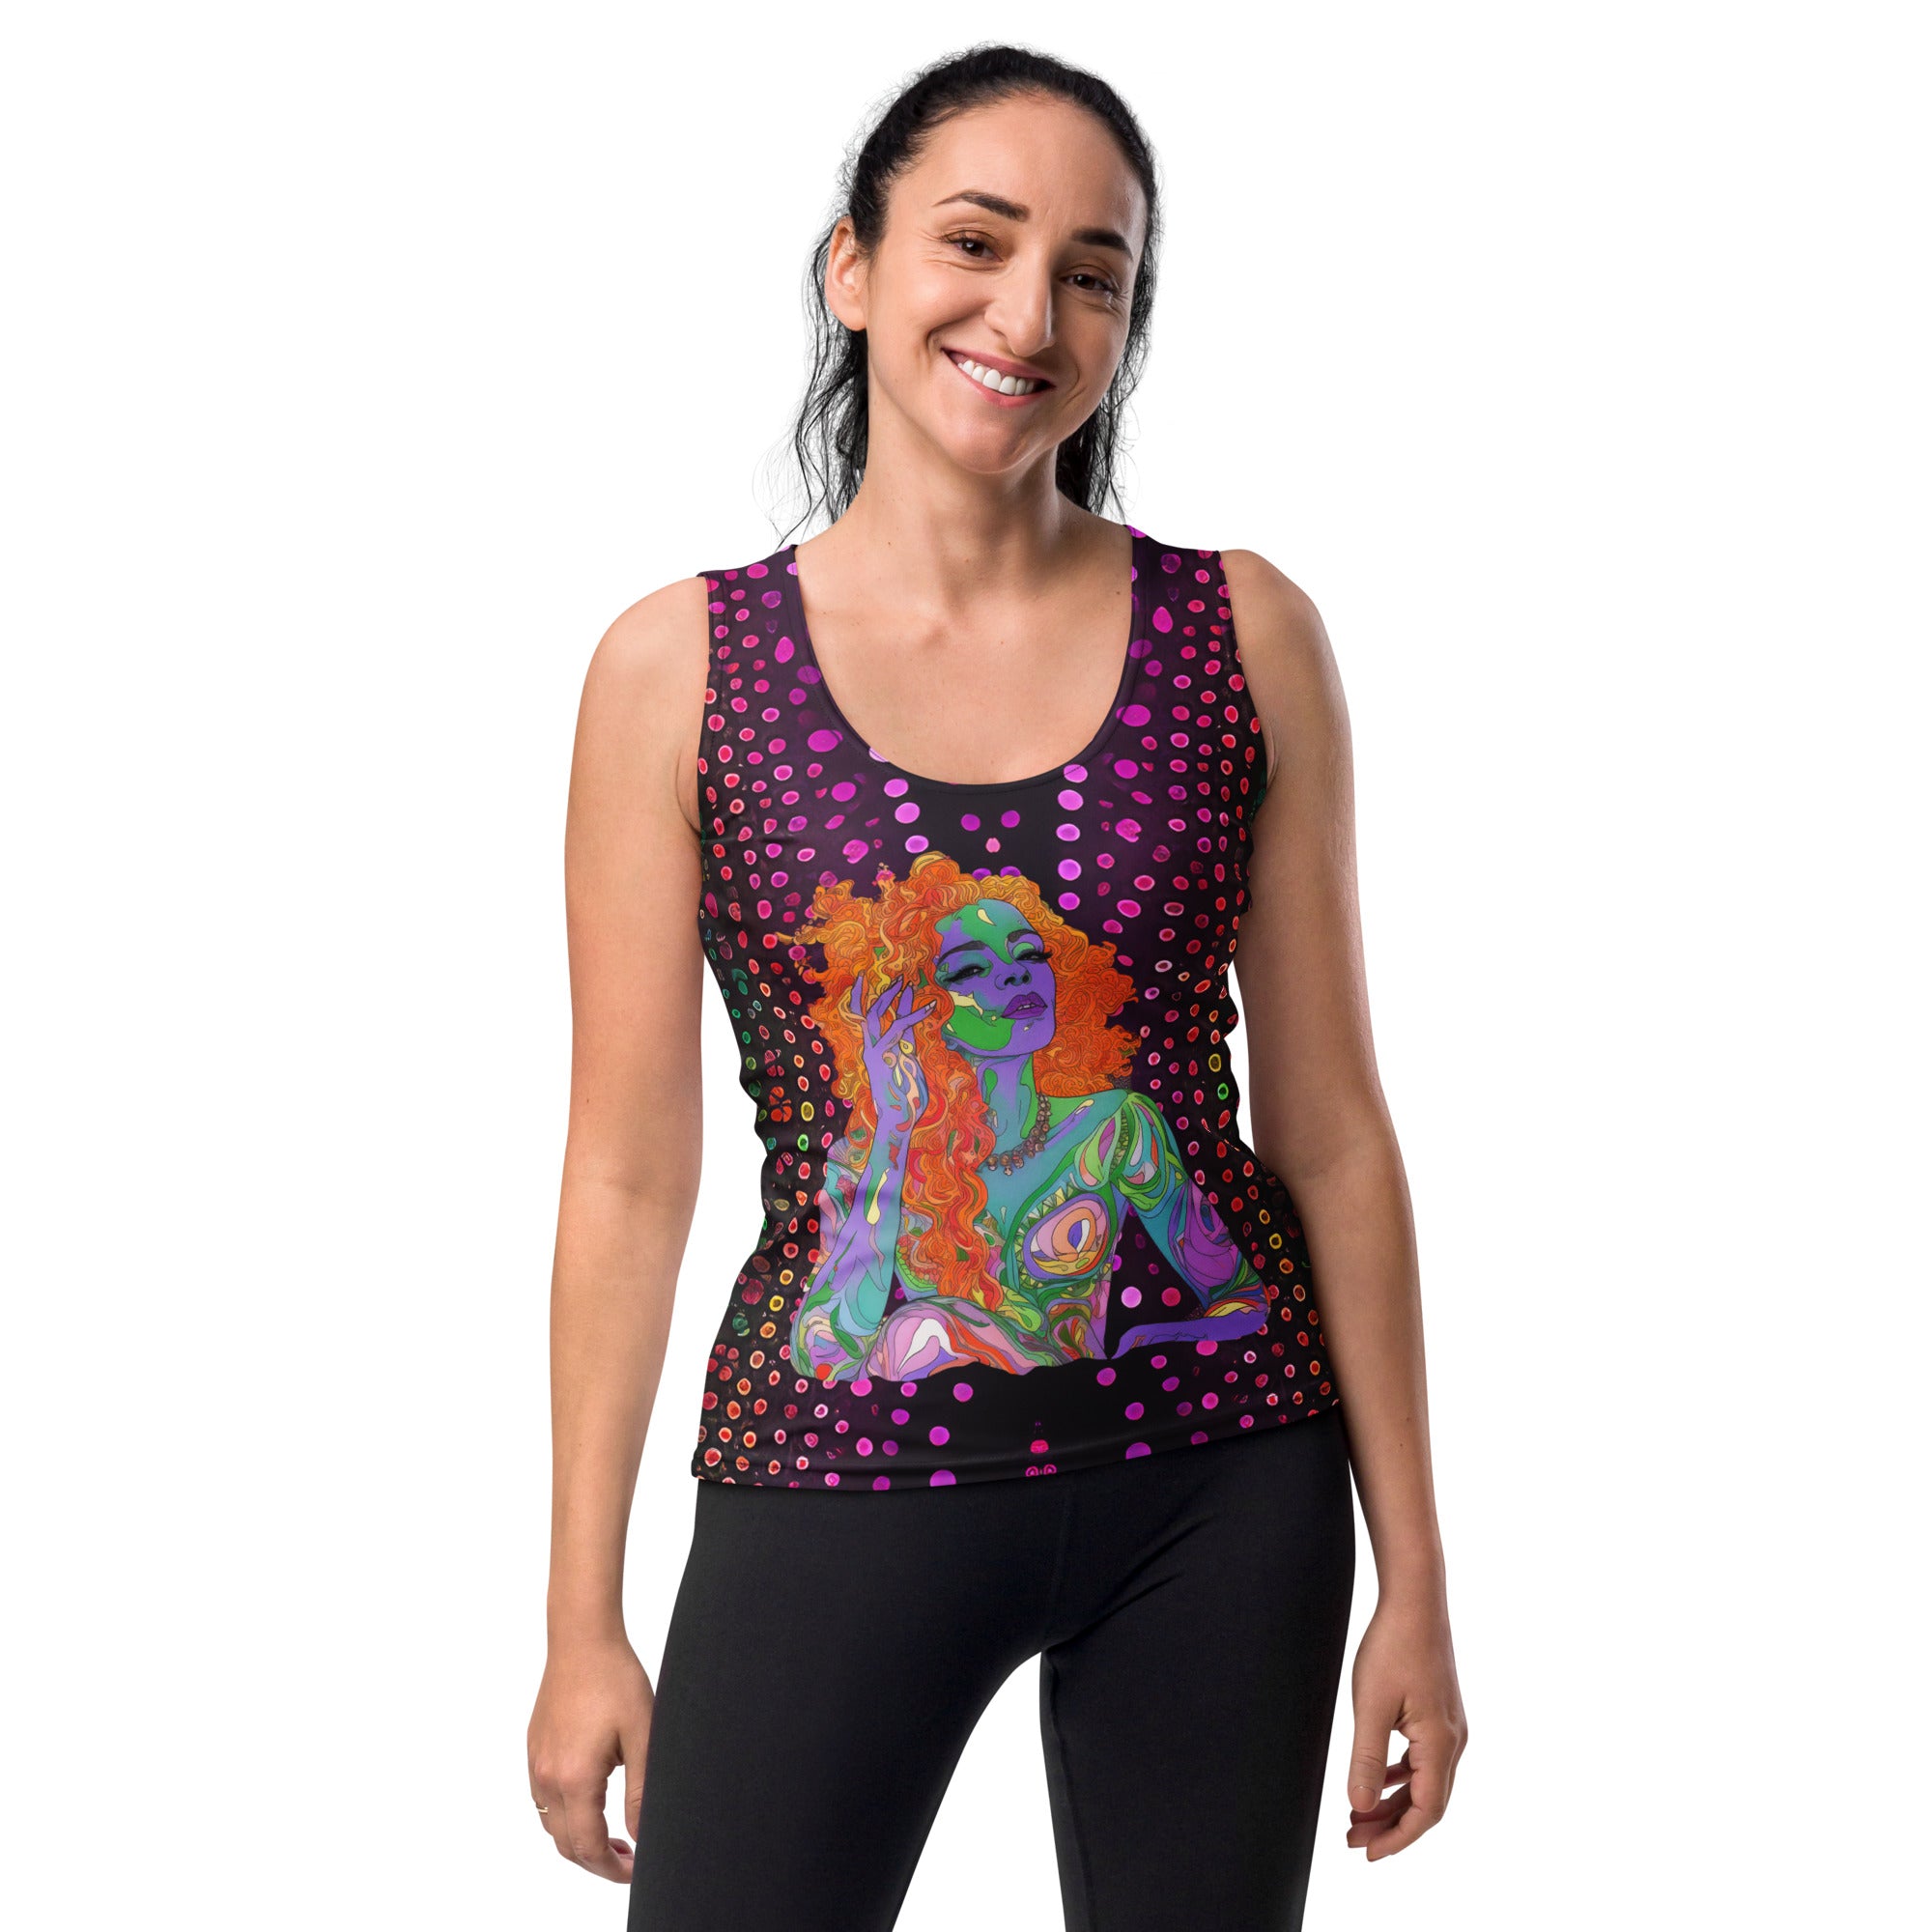 Blossom Bliss Women's Tank Top Front View.